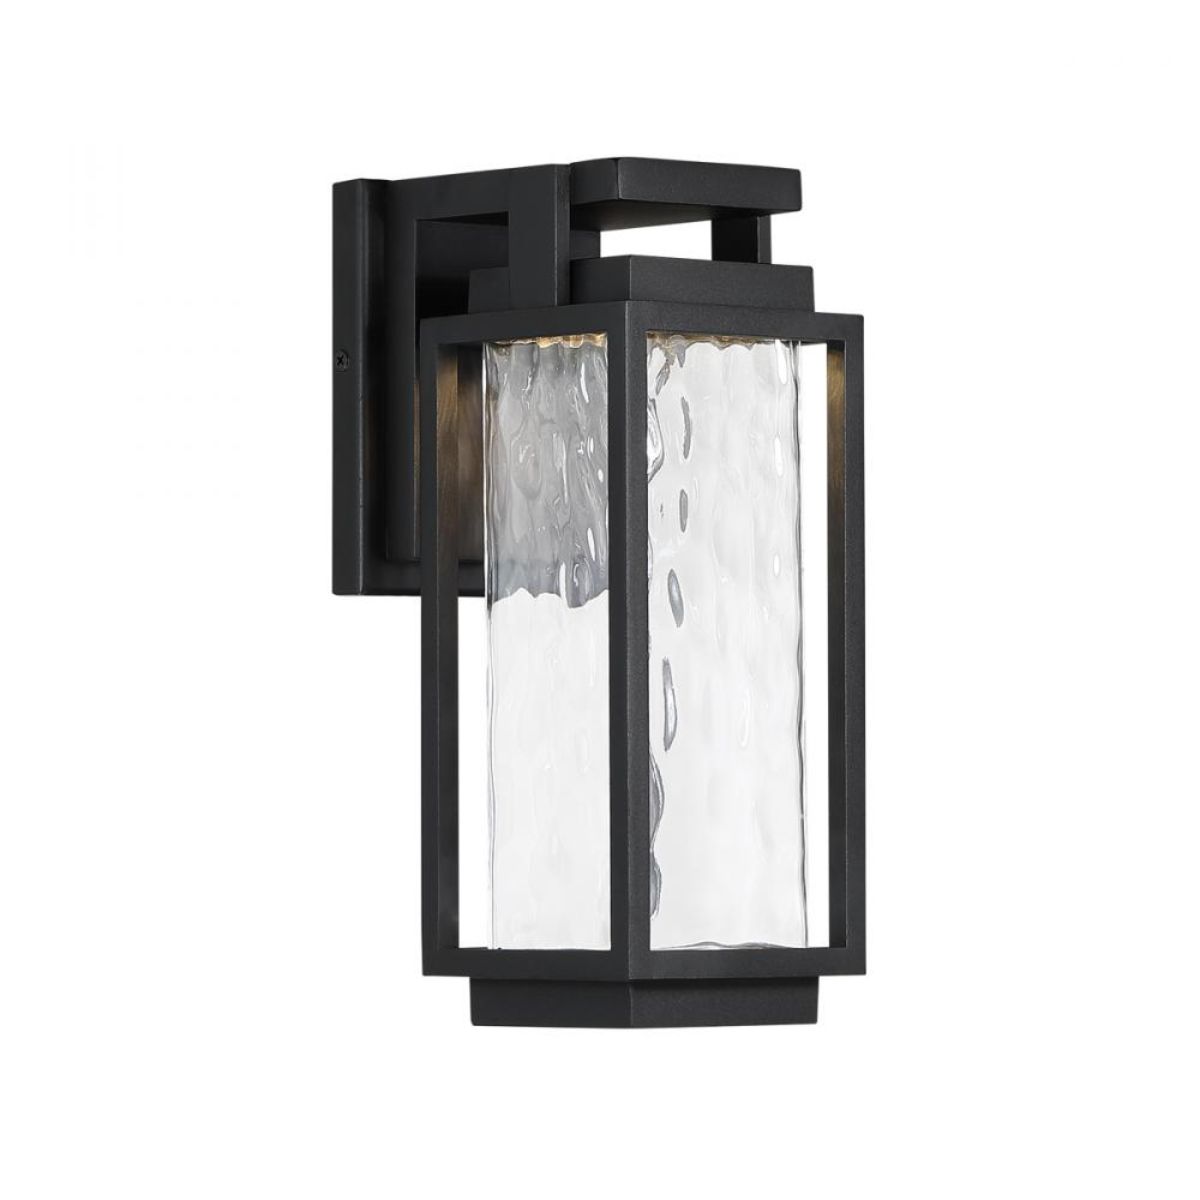 Two If By Sea 18 In. LED Outdoor Wall Sconce 902 lumens Black Finish